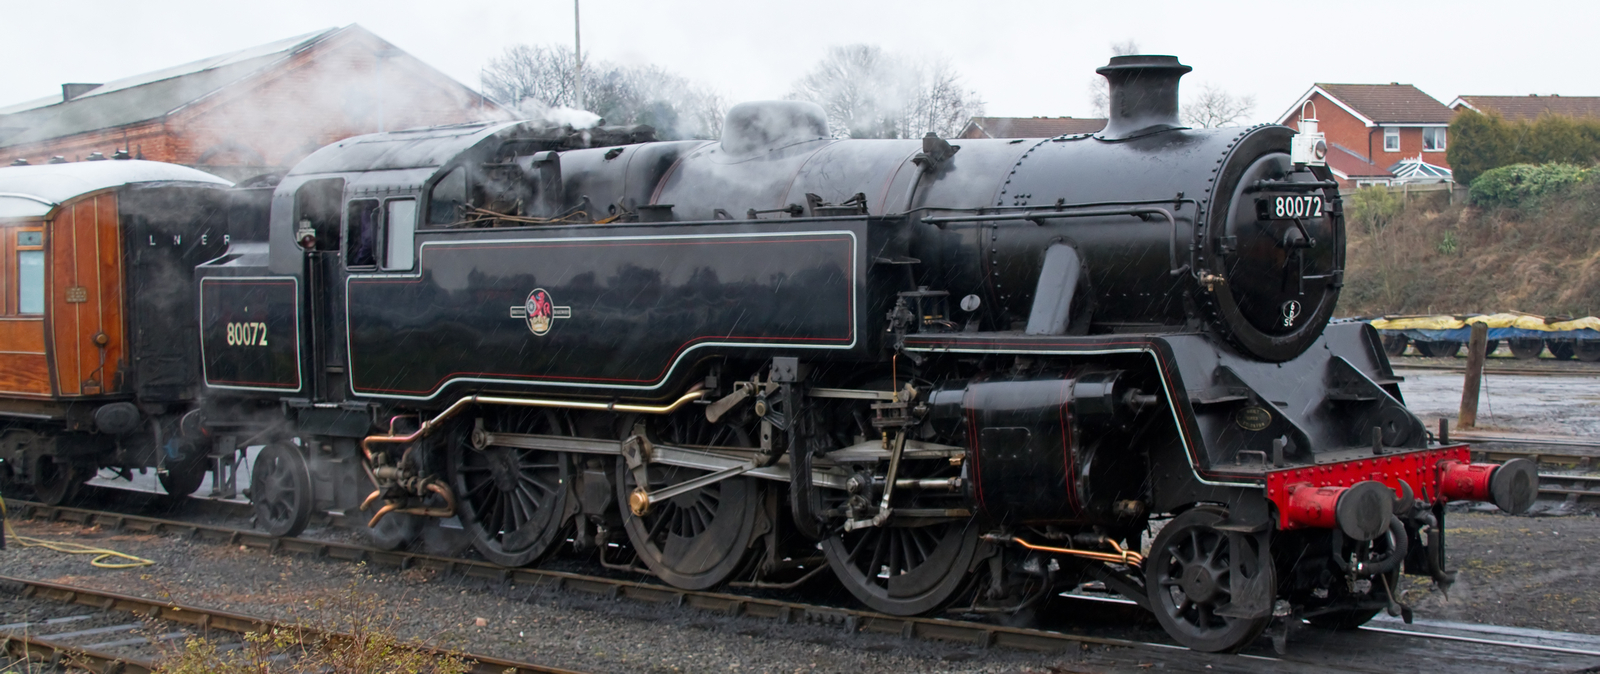 No. 80072 in March 2013 at Kidderminster